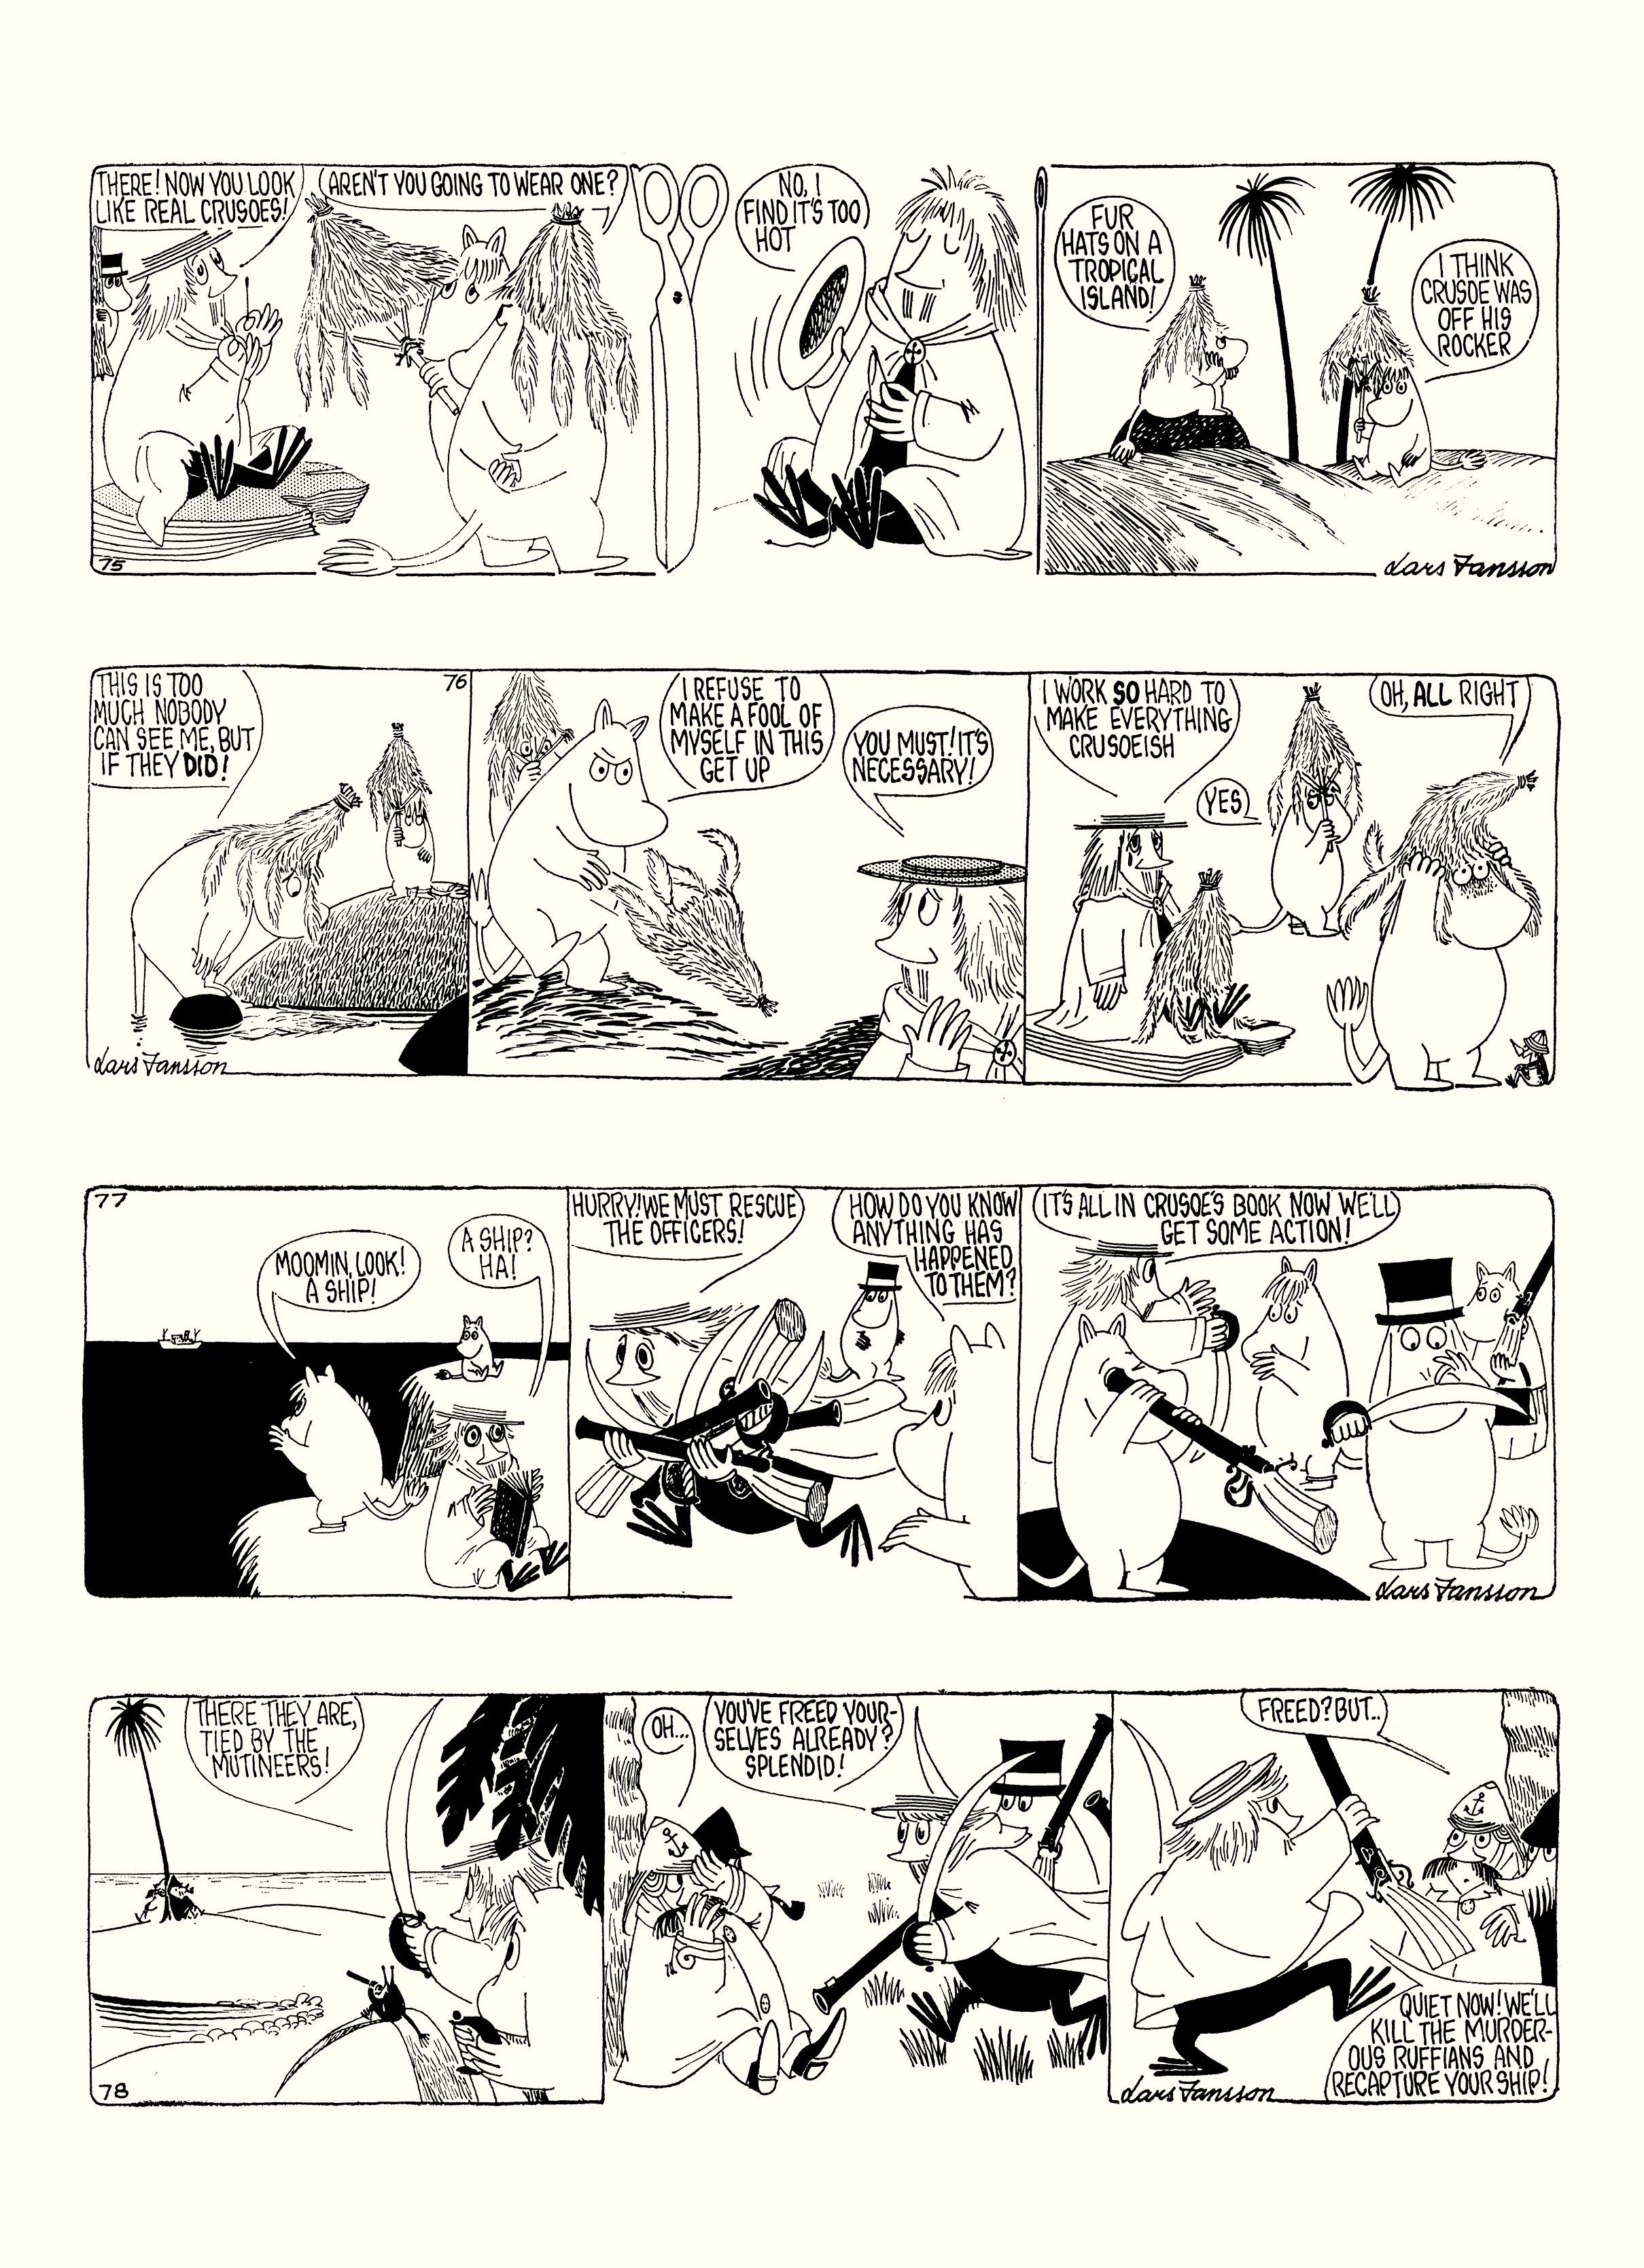 Read online Moomin: The Complete Lars Jansson Comic Strip comic -  Issue # TPB 8 - 24